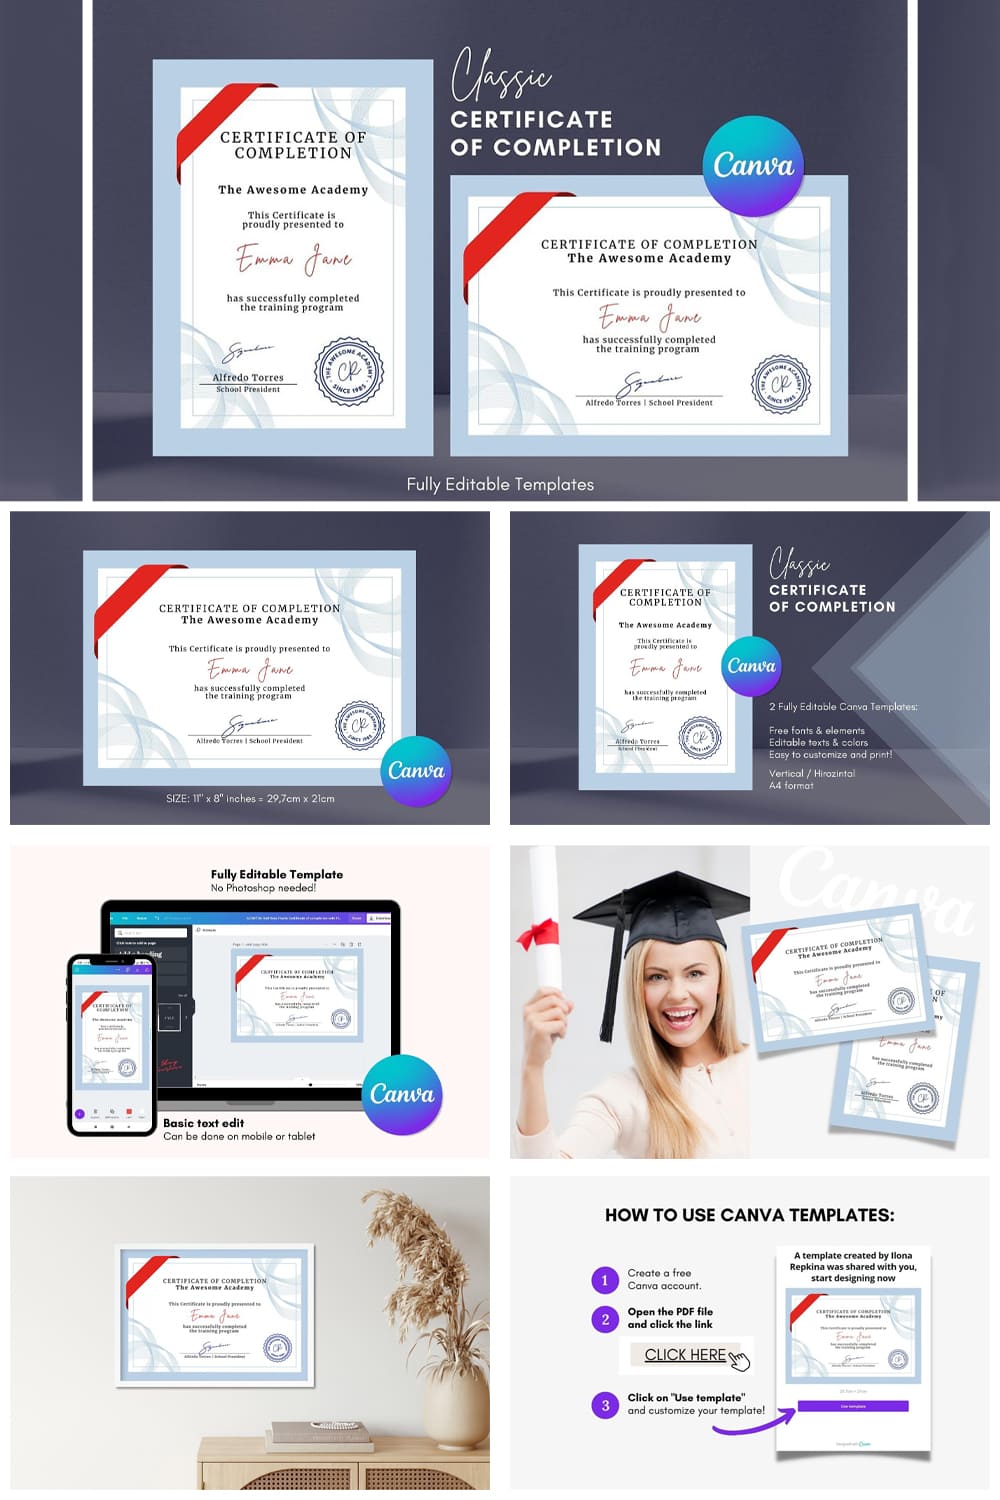 Classic certificate of completion - pinterest image preview.